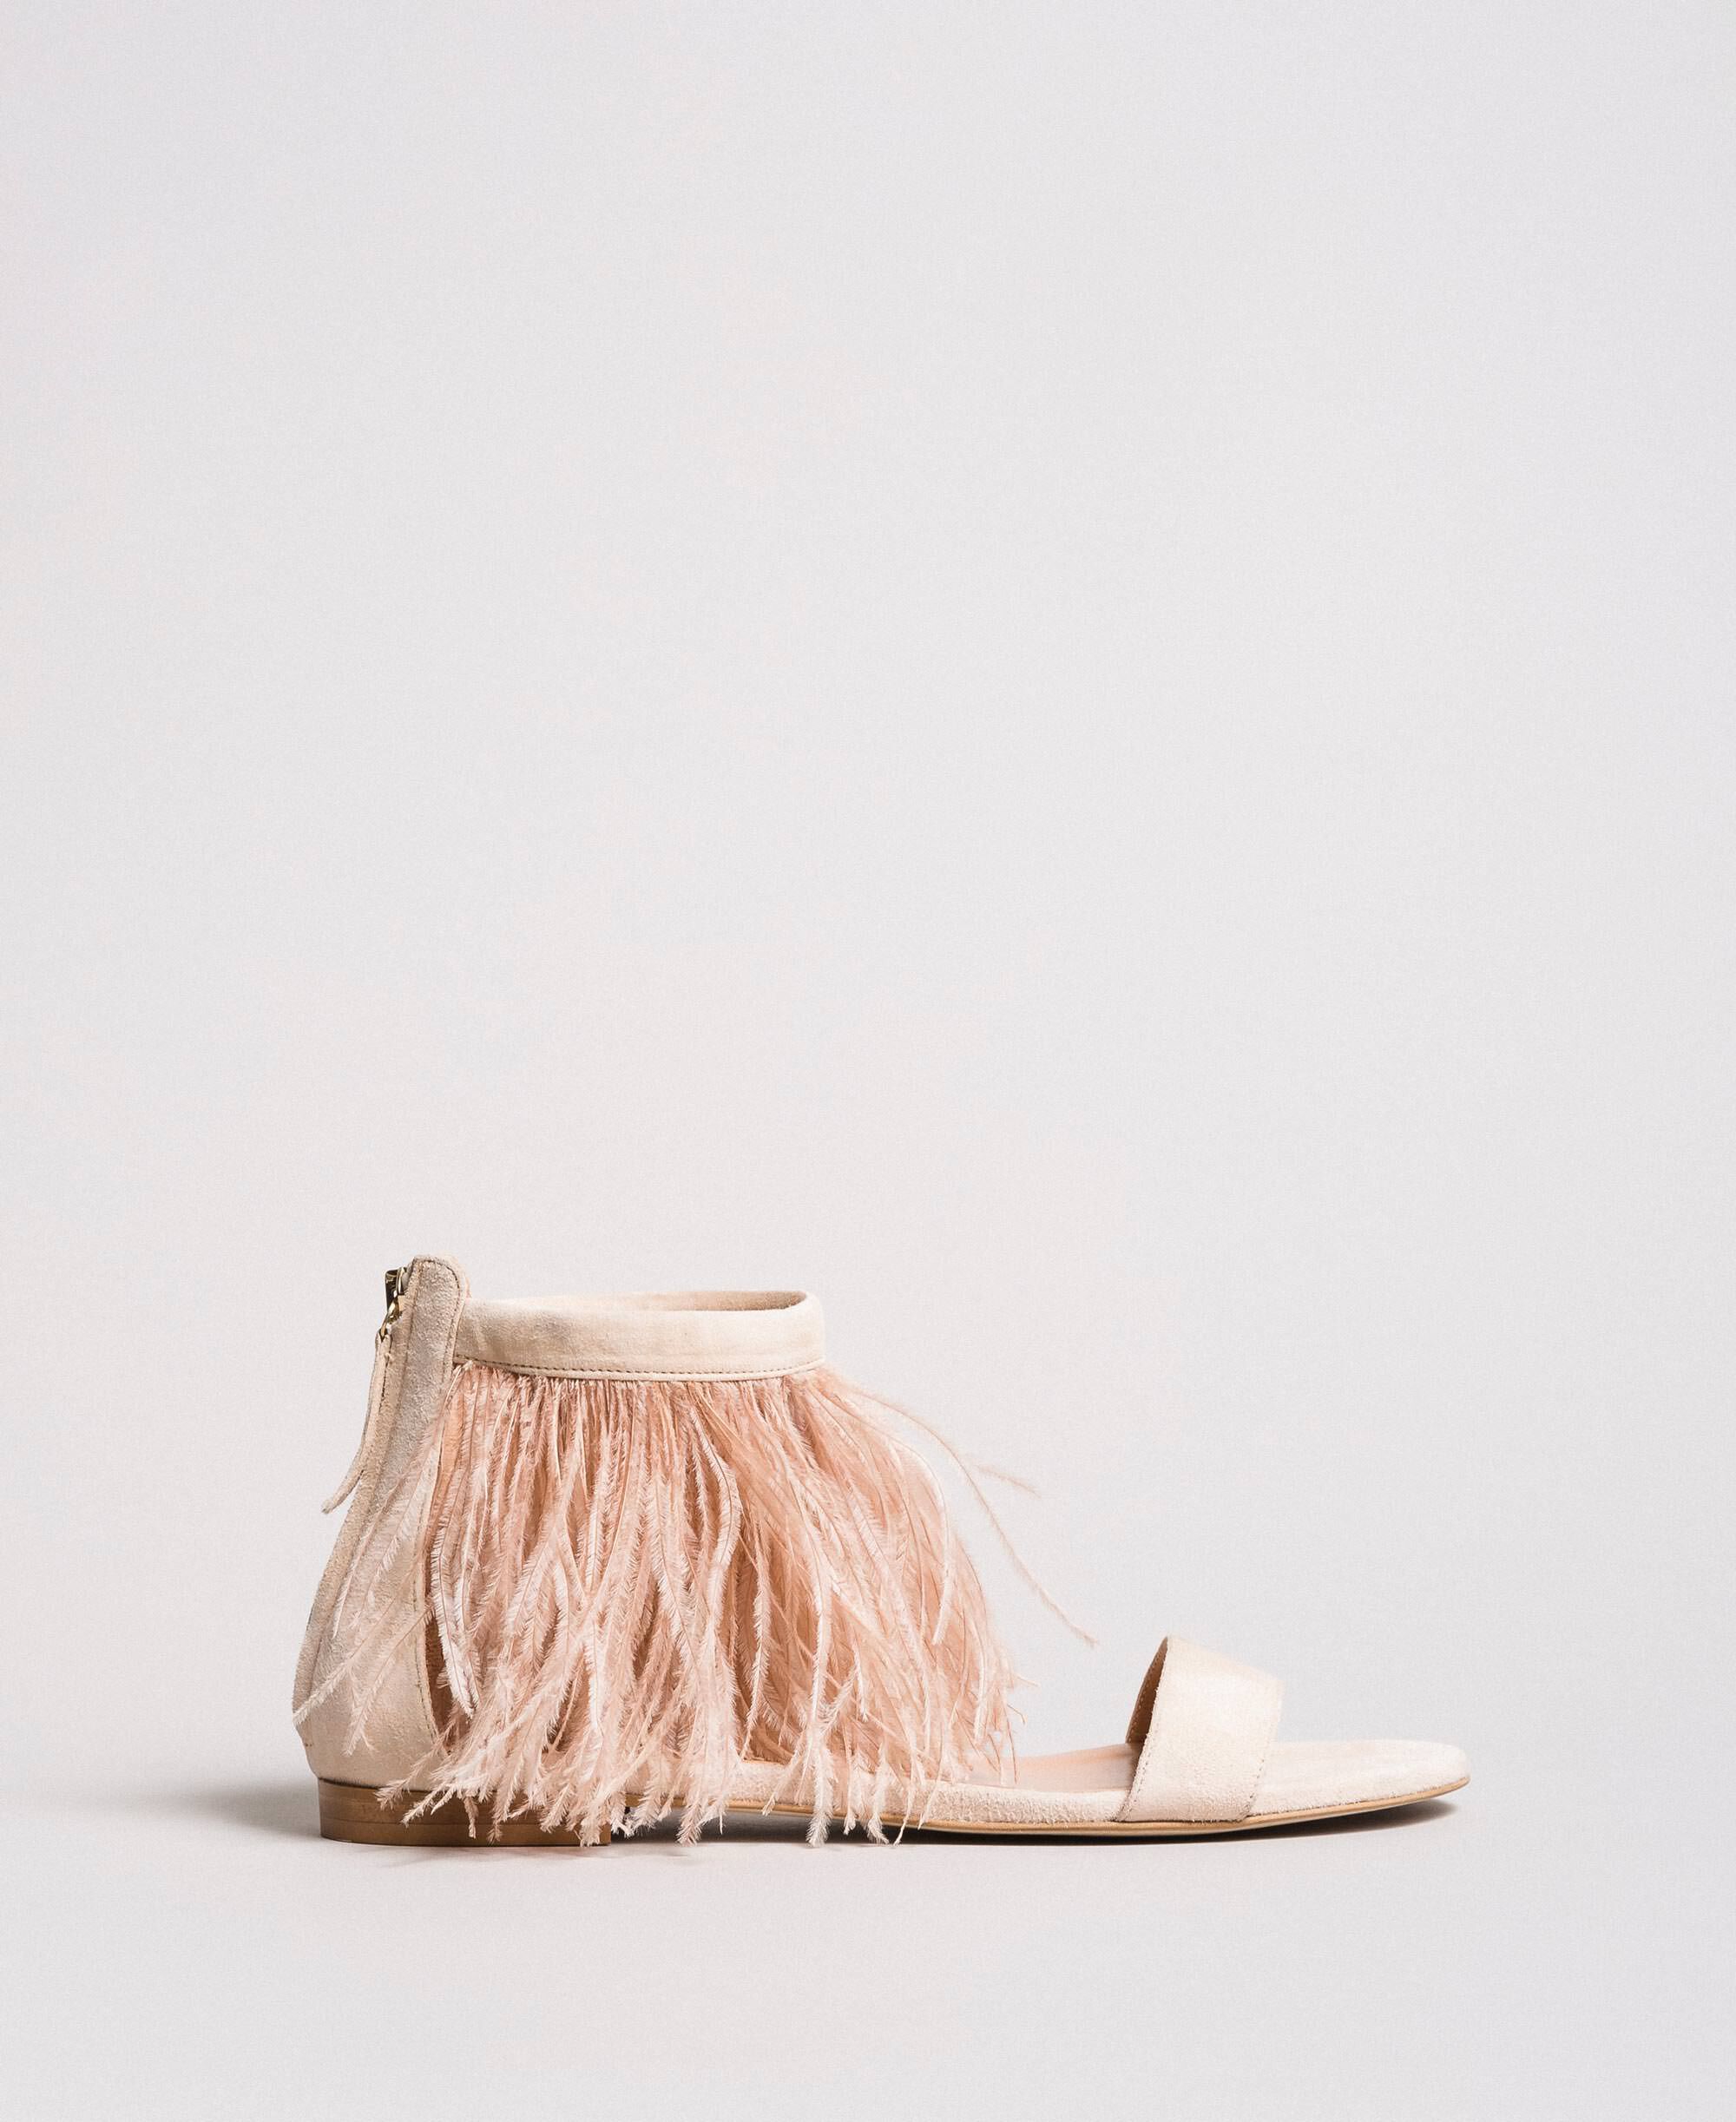 feather sandals flat